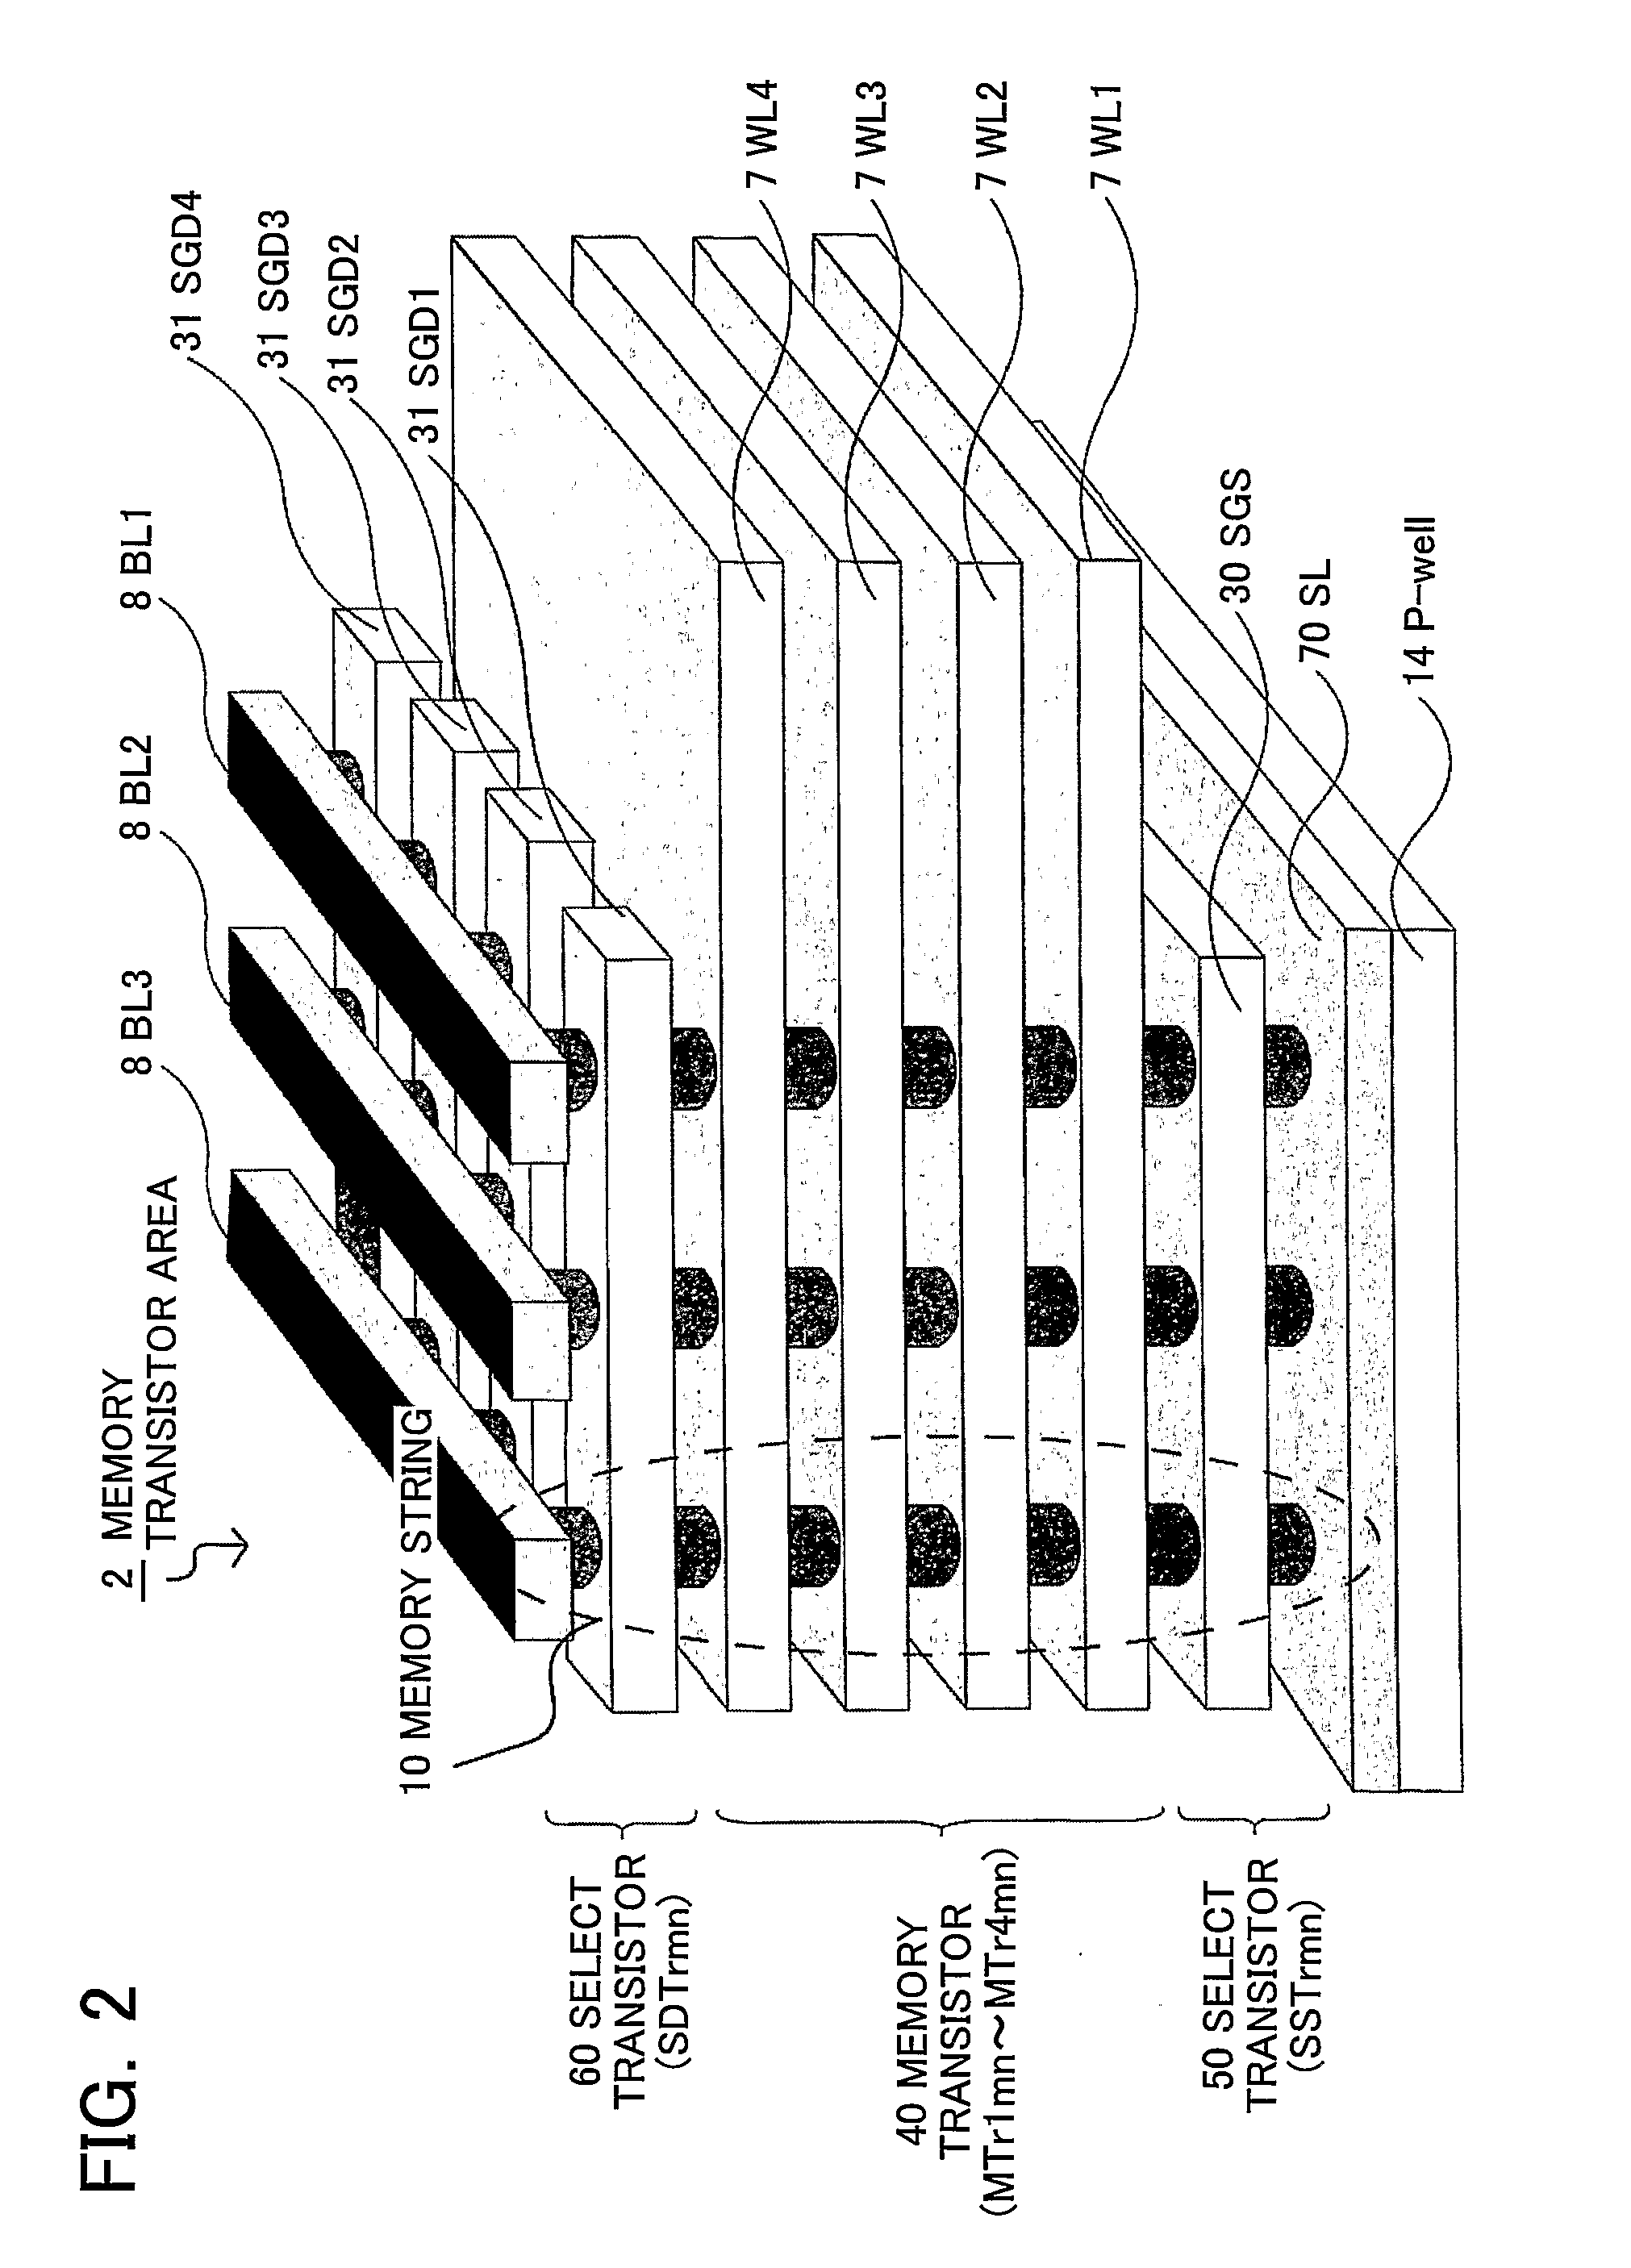 Non-volatile semiconductor memory device and method of making the same